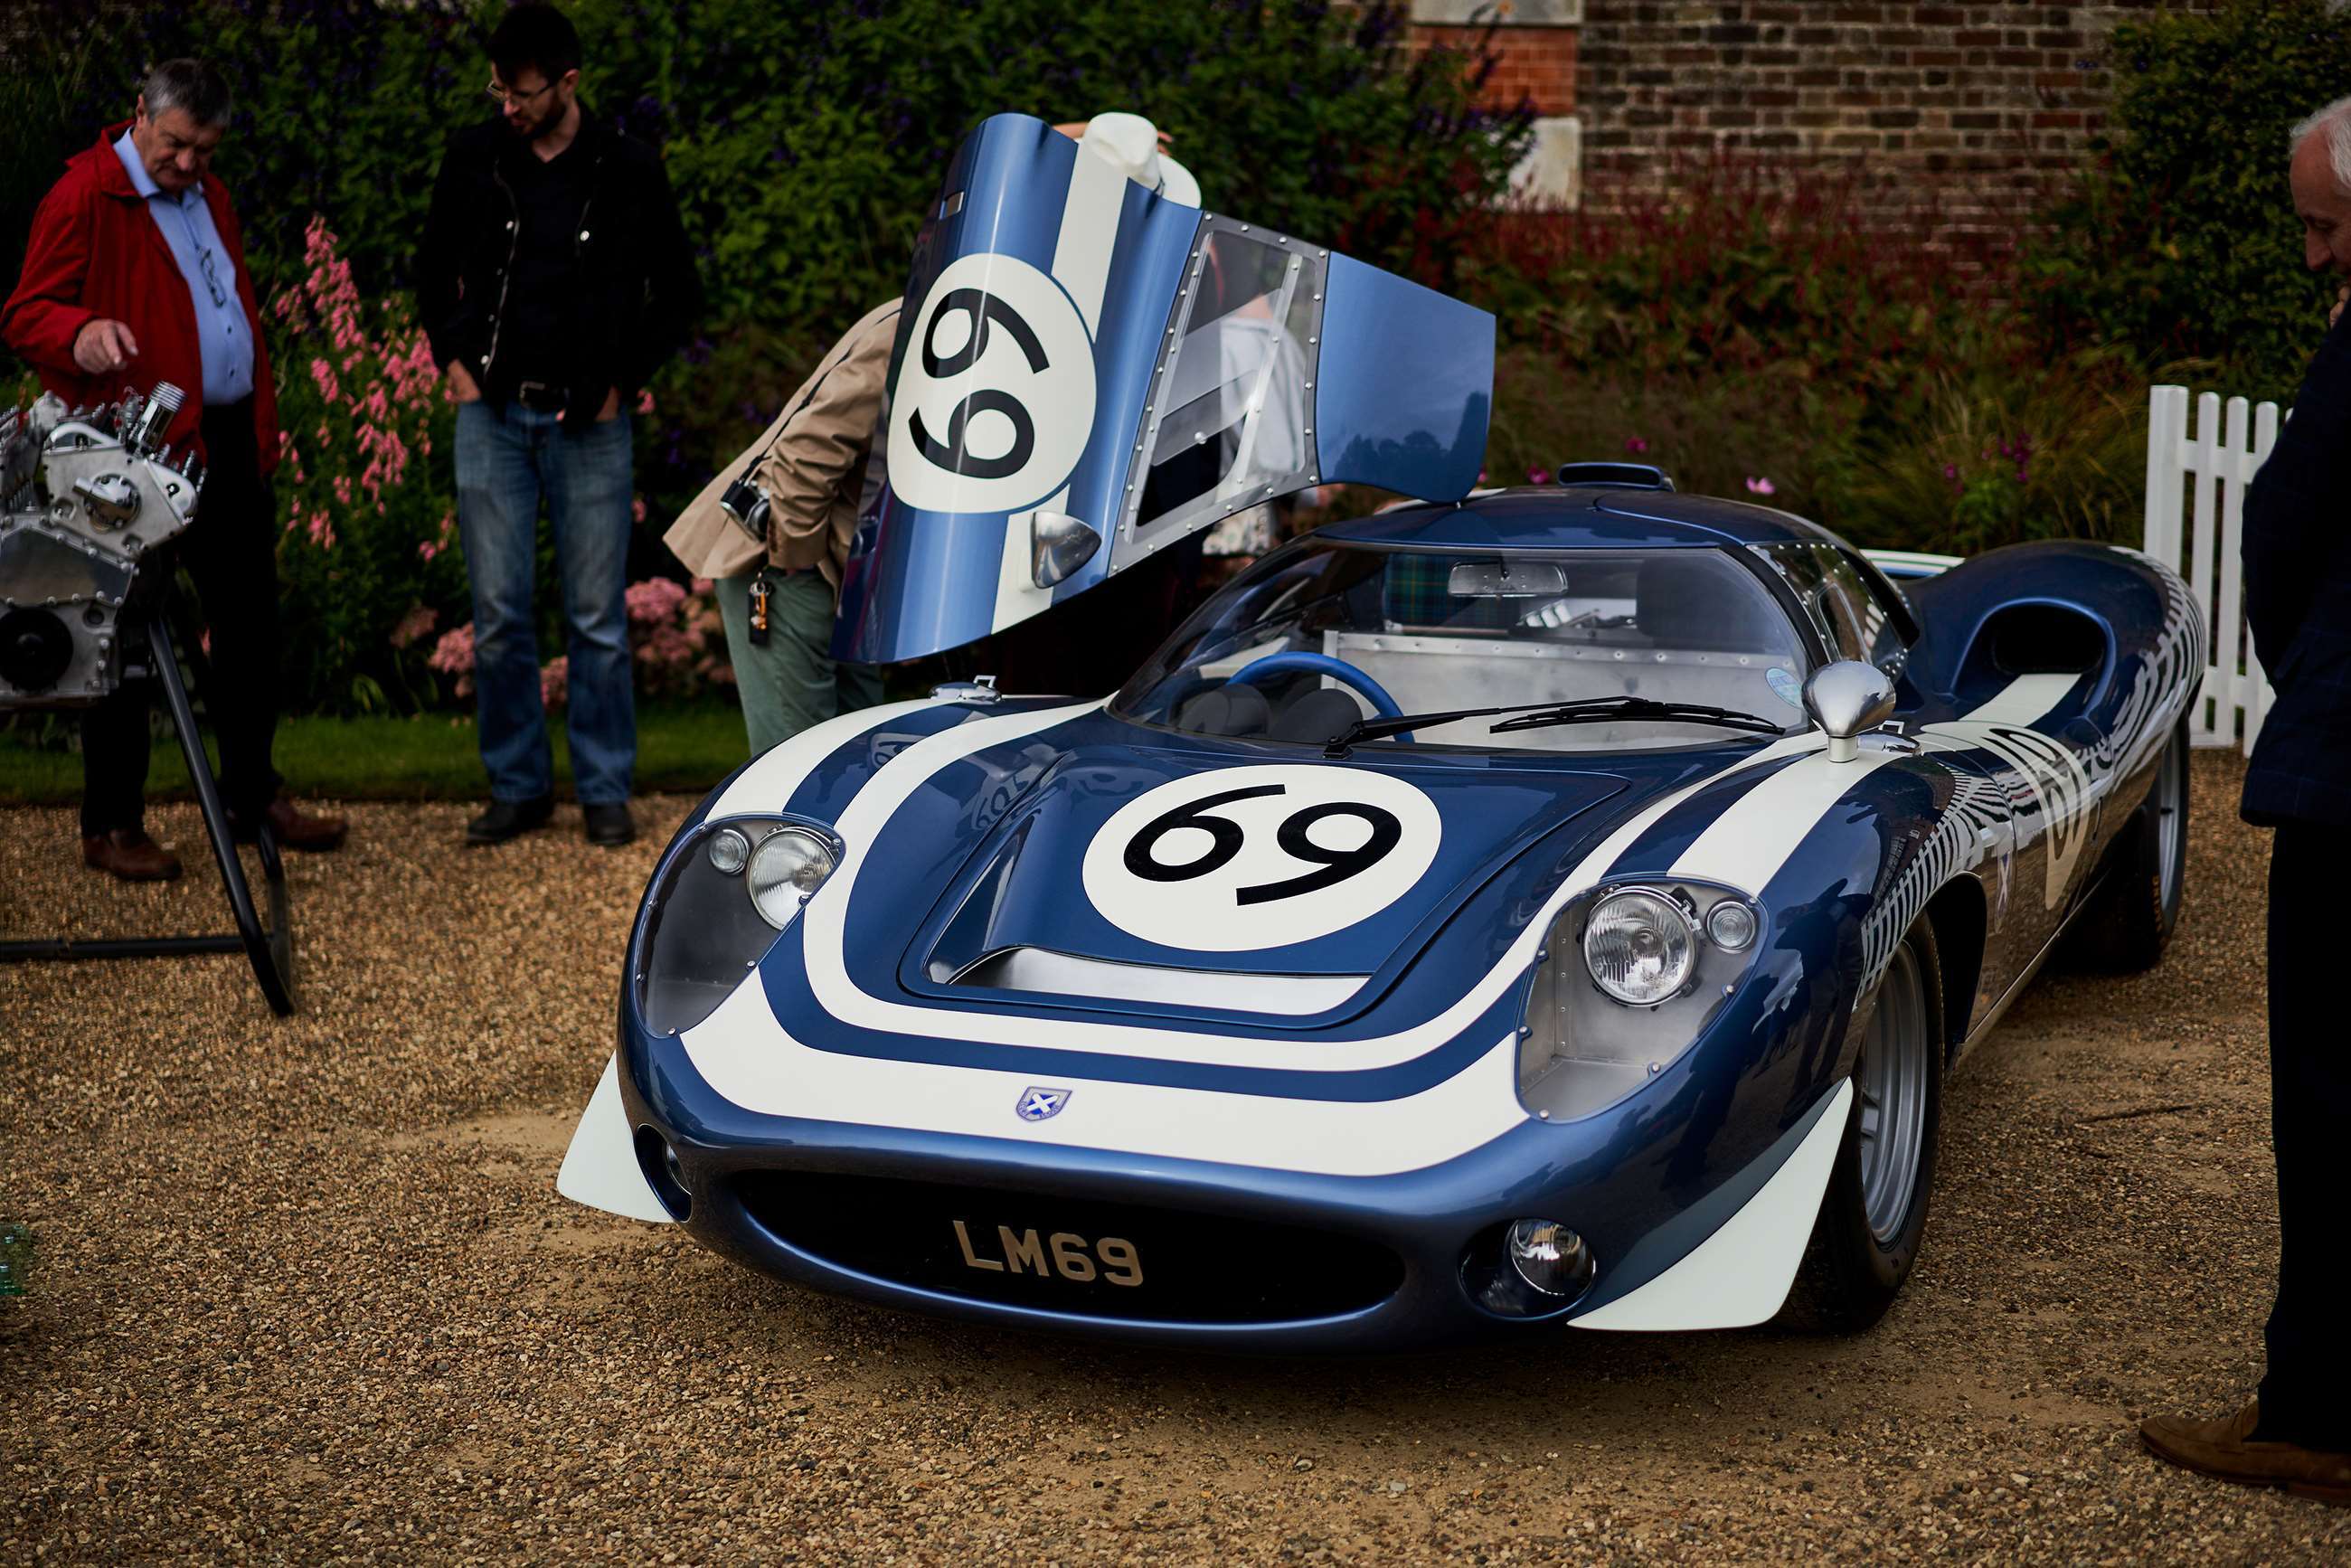 ecurie-ecosse-lm69-concours-of-elegance-2019-james-lynch-goodwood-10092019.jpg